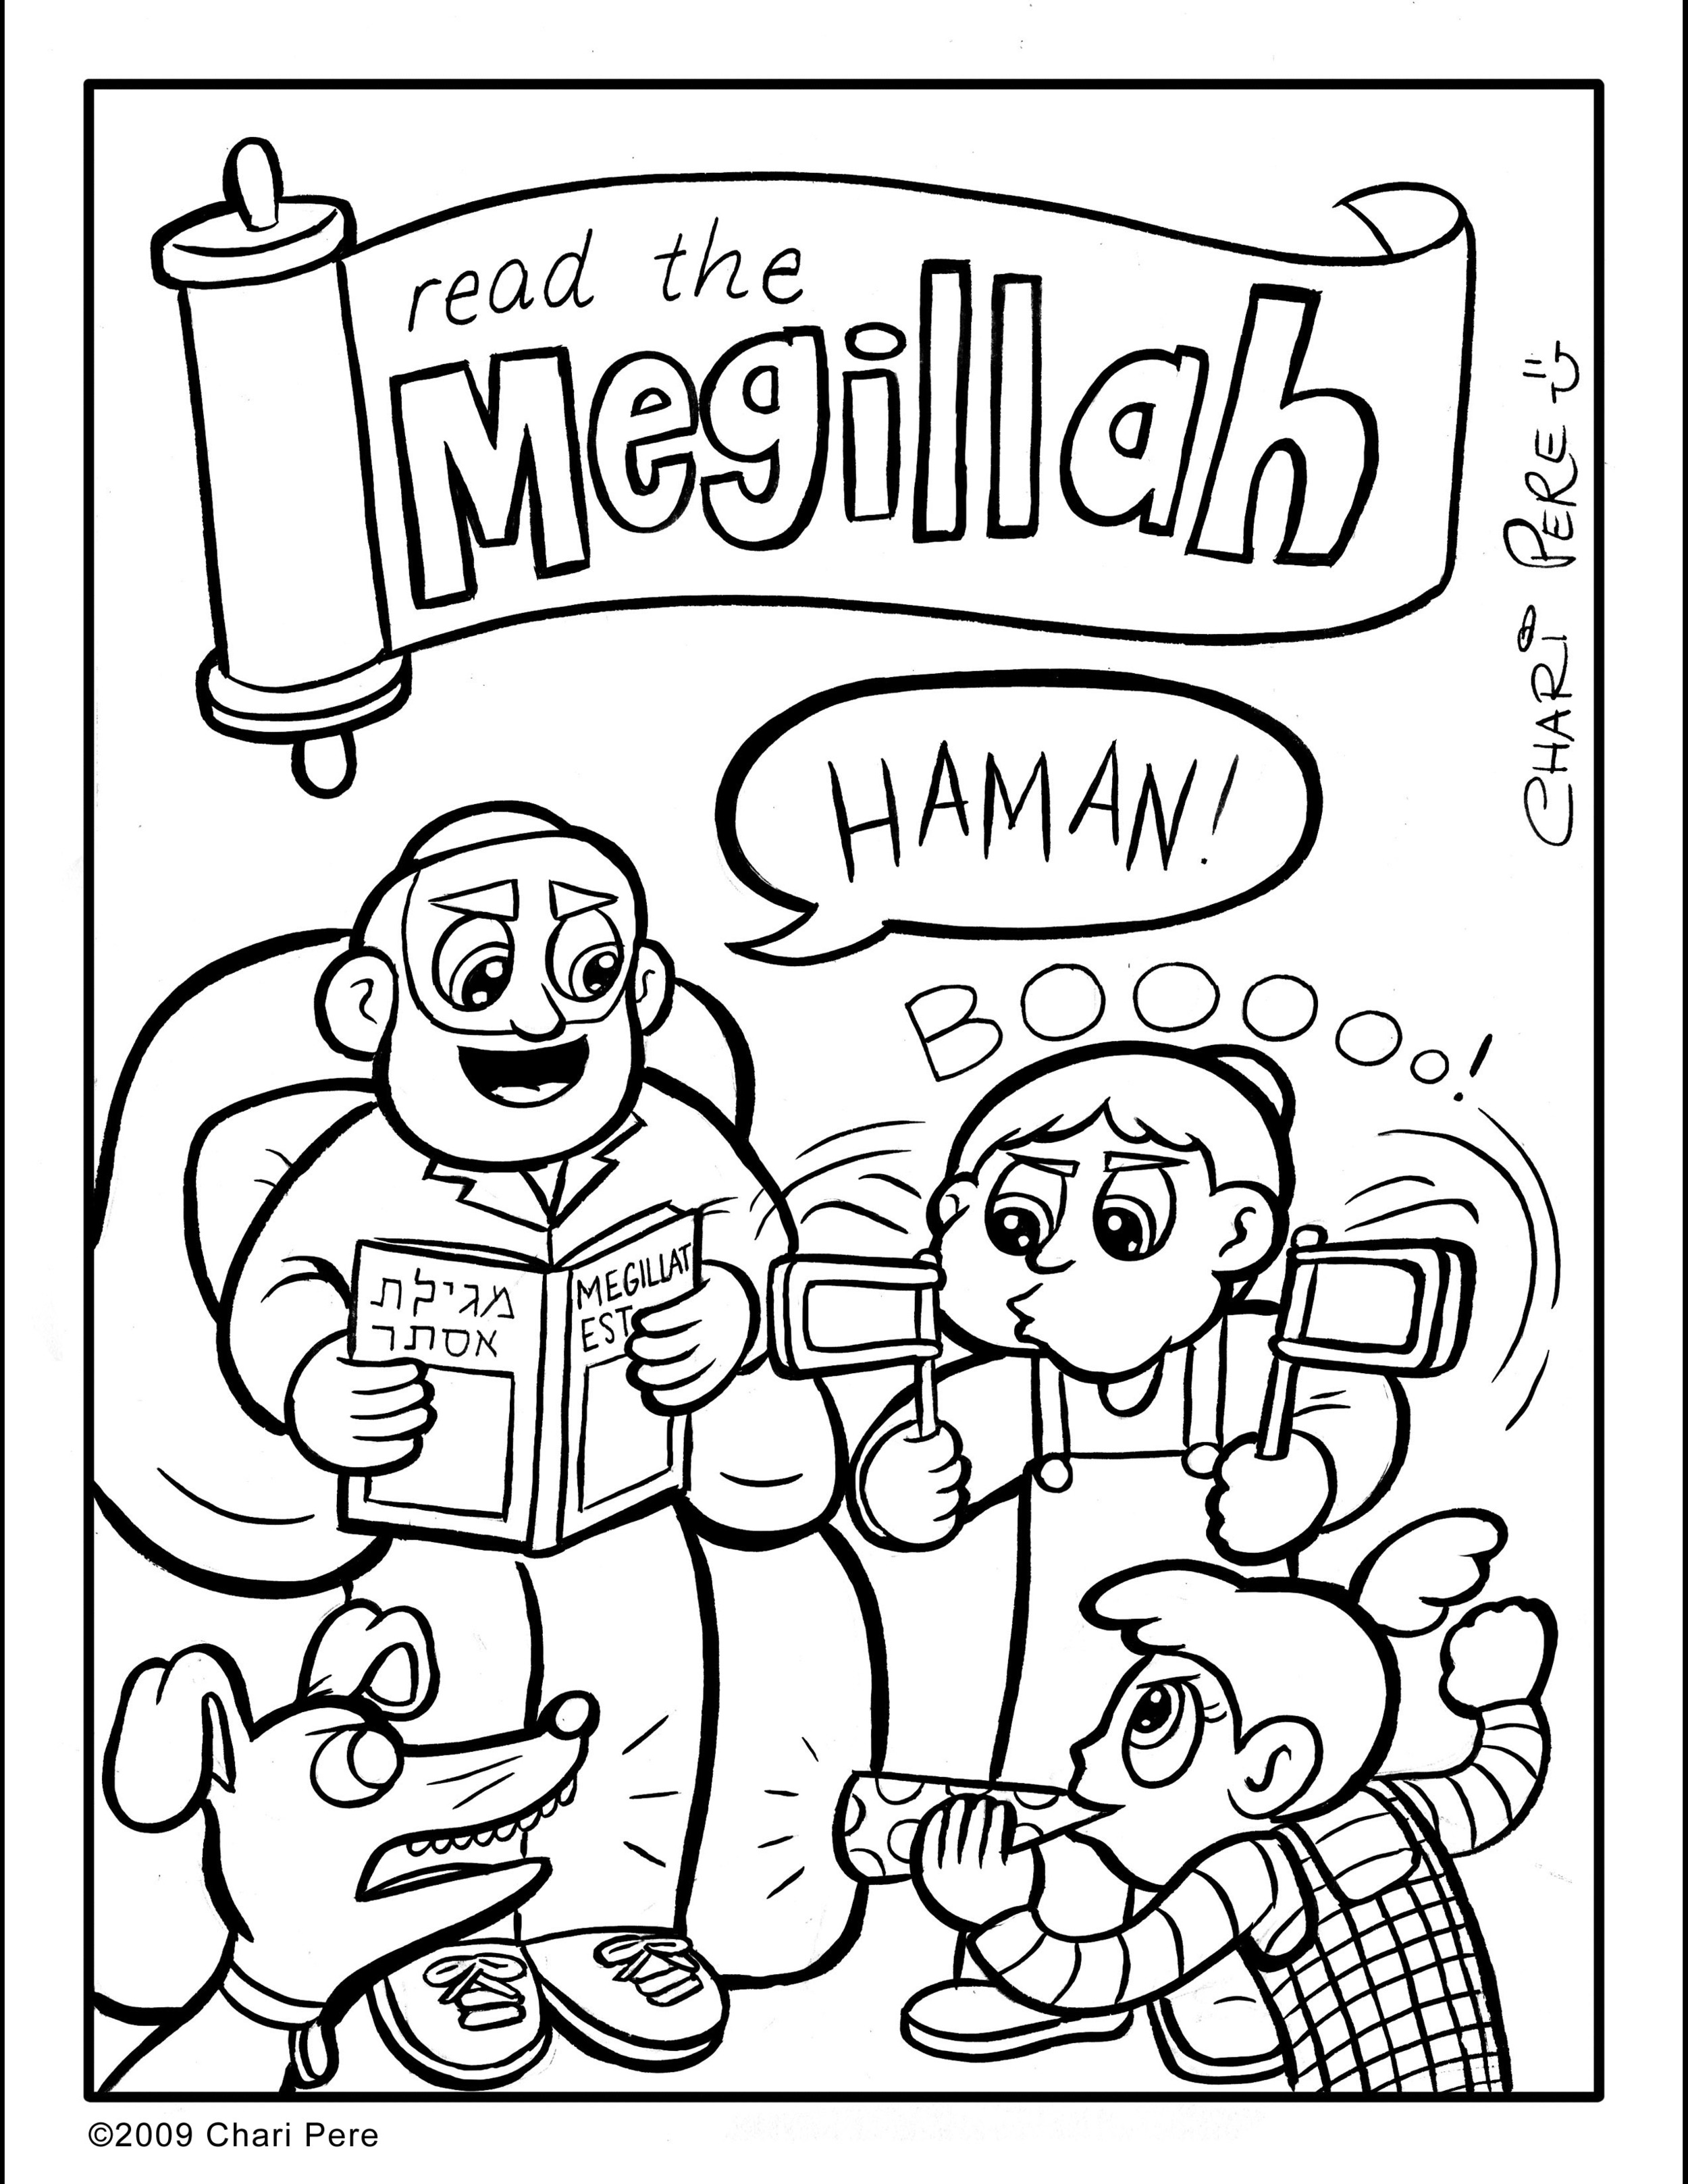 Coloring pages â chari pere cartoonist